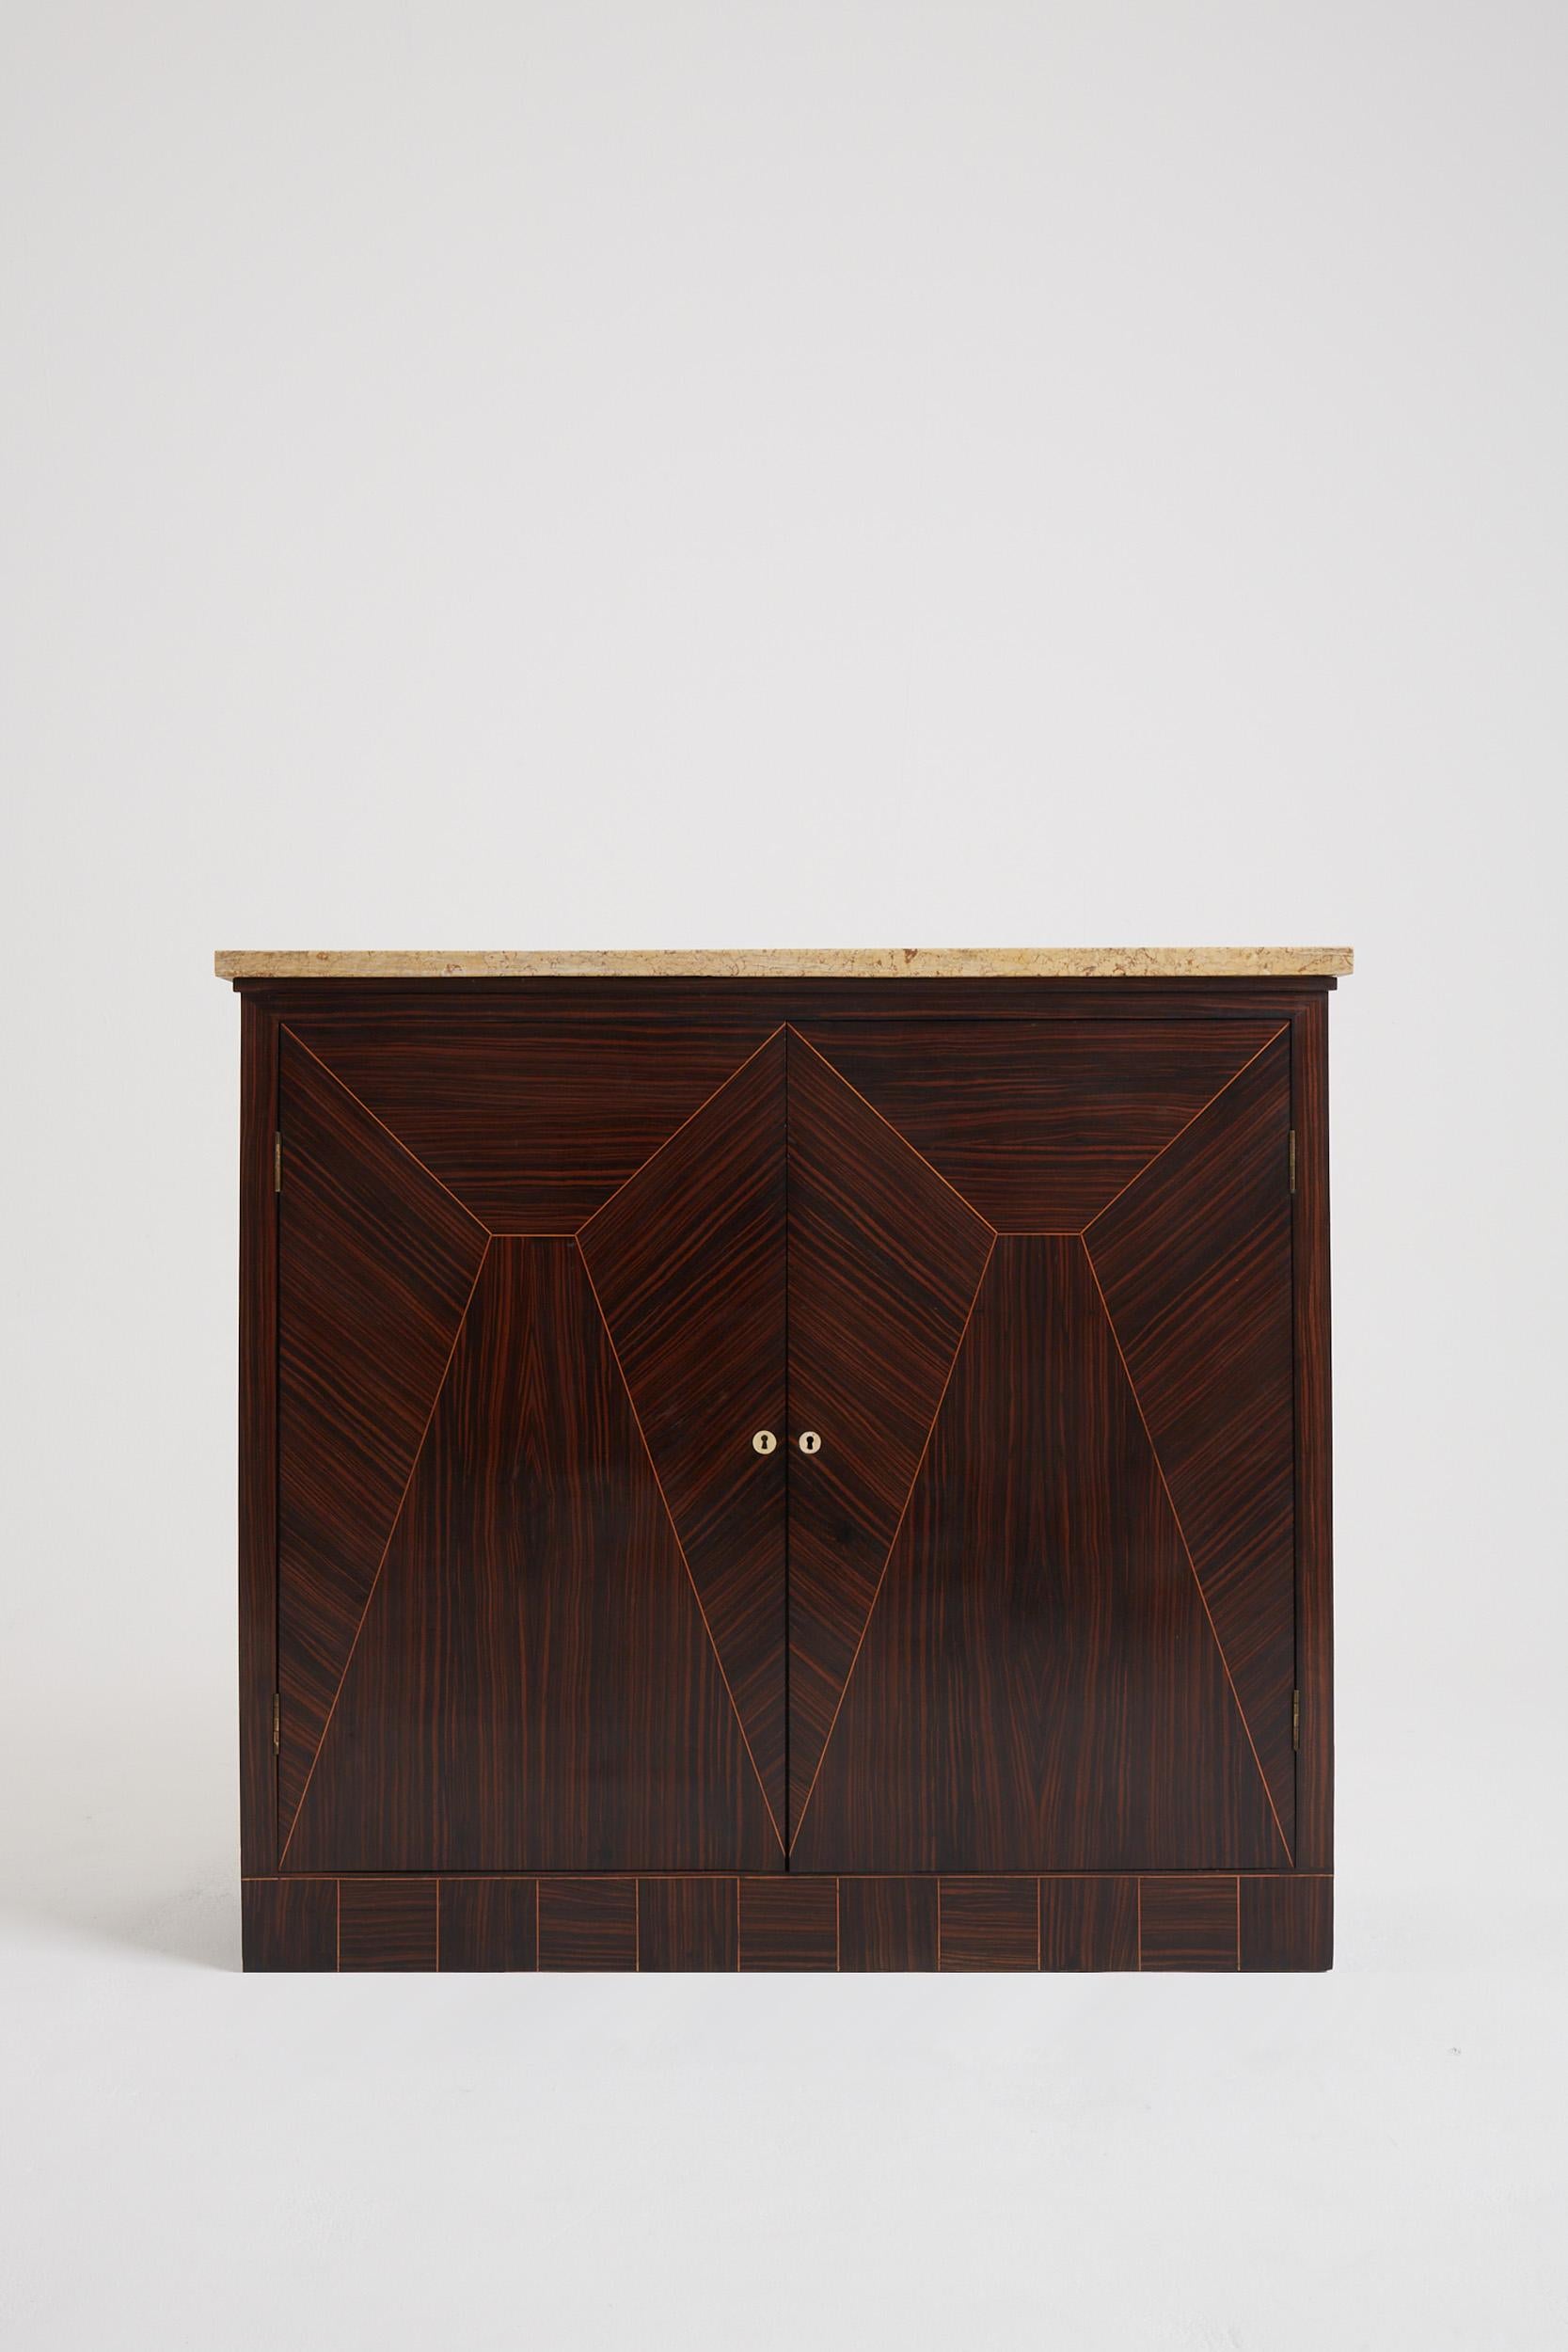 An Art Deco Macassar ebony and stone top cabinet, with a superb geometric marquetry and bone key holes.
France, Circa 1930.